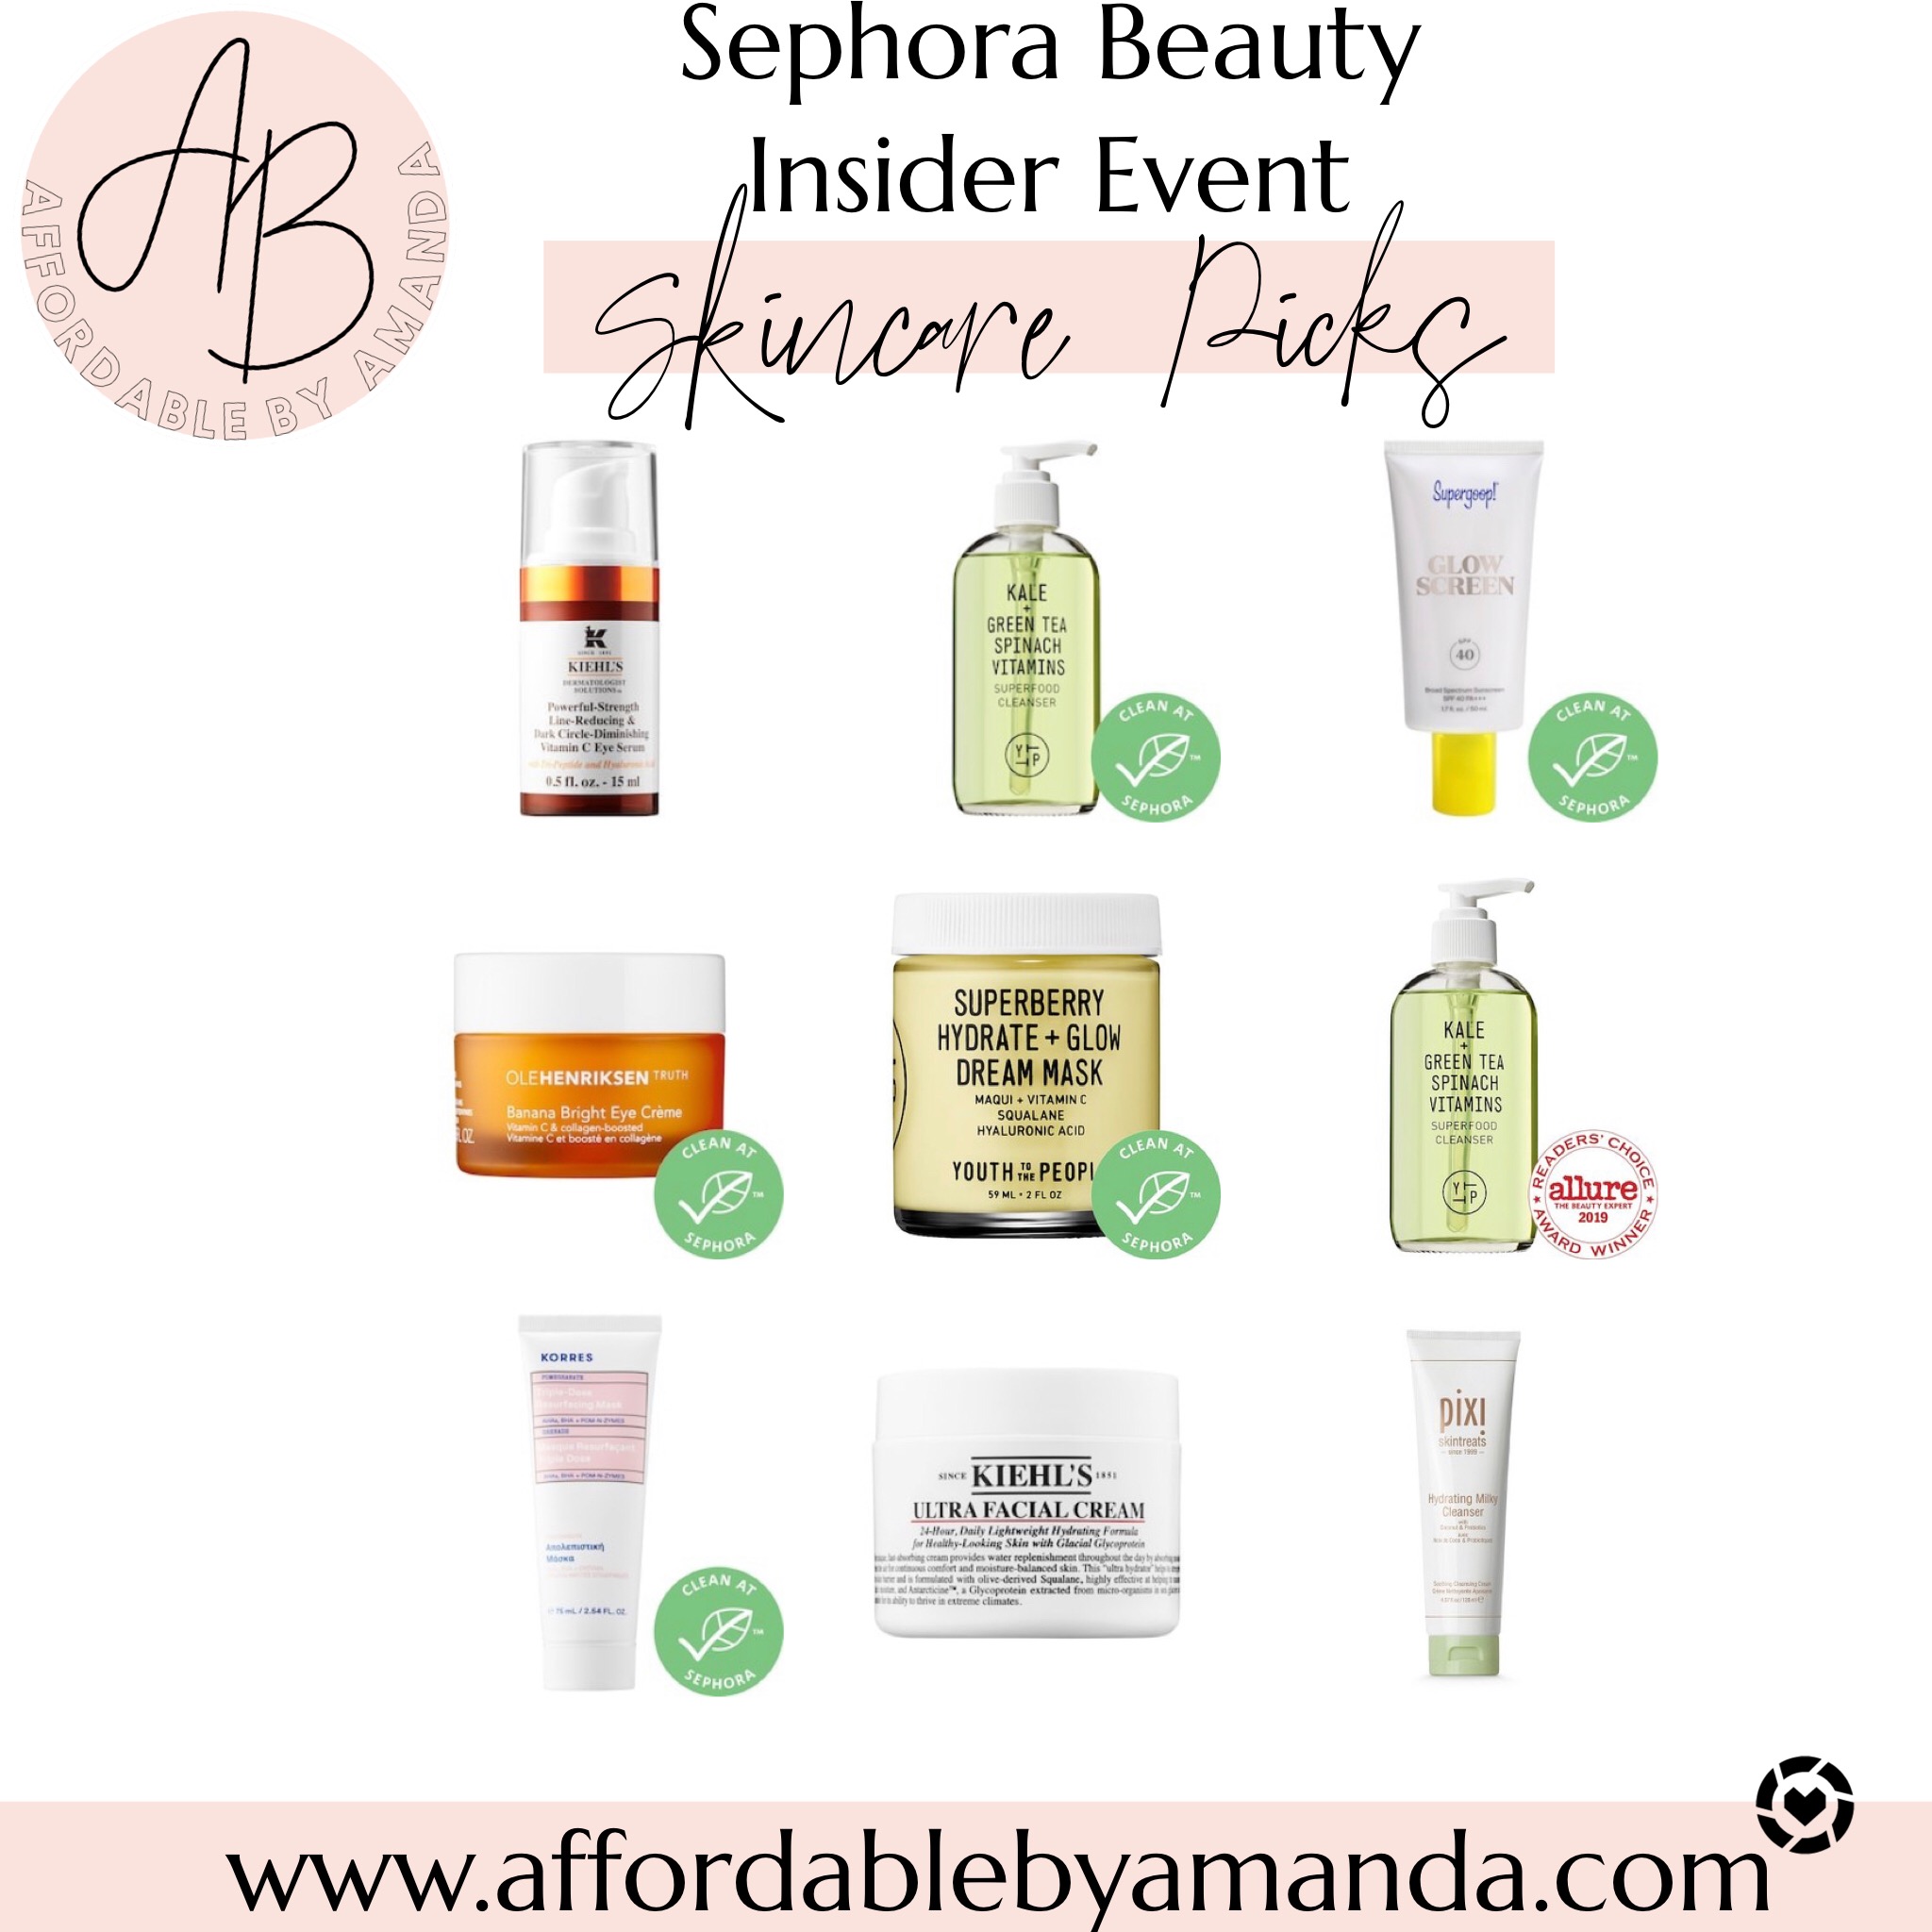 Sephora VIB Sale Spring 2020 | Spring Sale 2020 | Spring Savings Event | Sephora | Sephora VIB Beauty Insider Sale Is Back For Spring 2020 | Top 5 Skincare Products from the Sephora VIB Sale